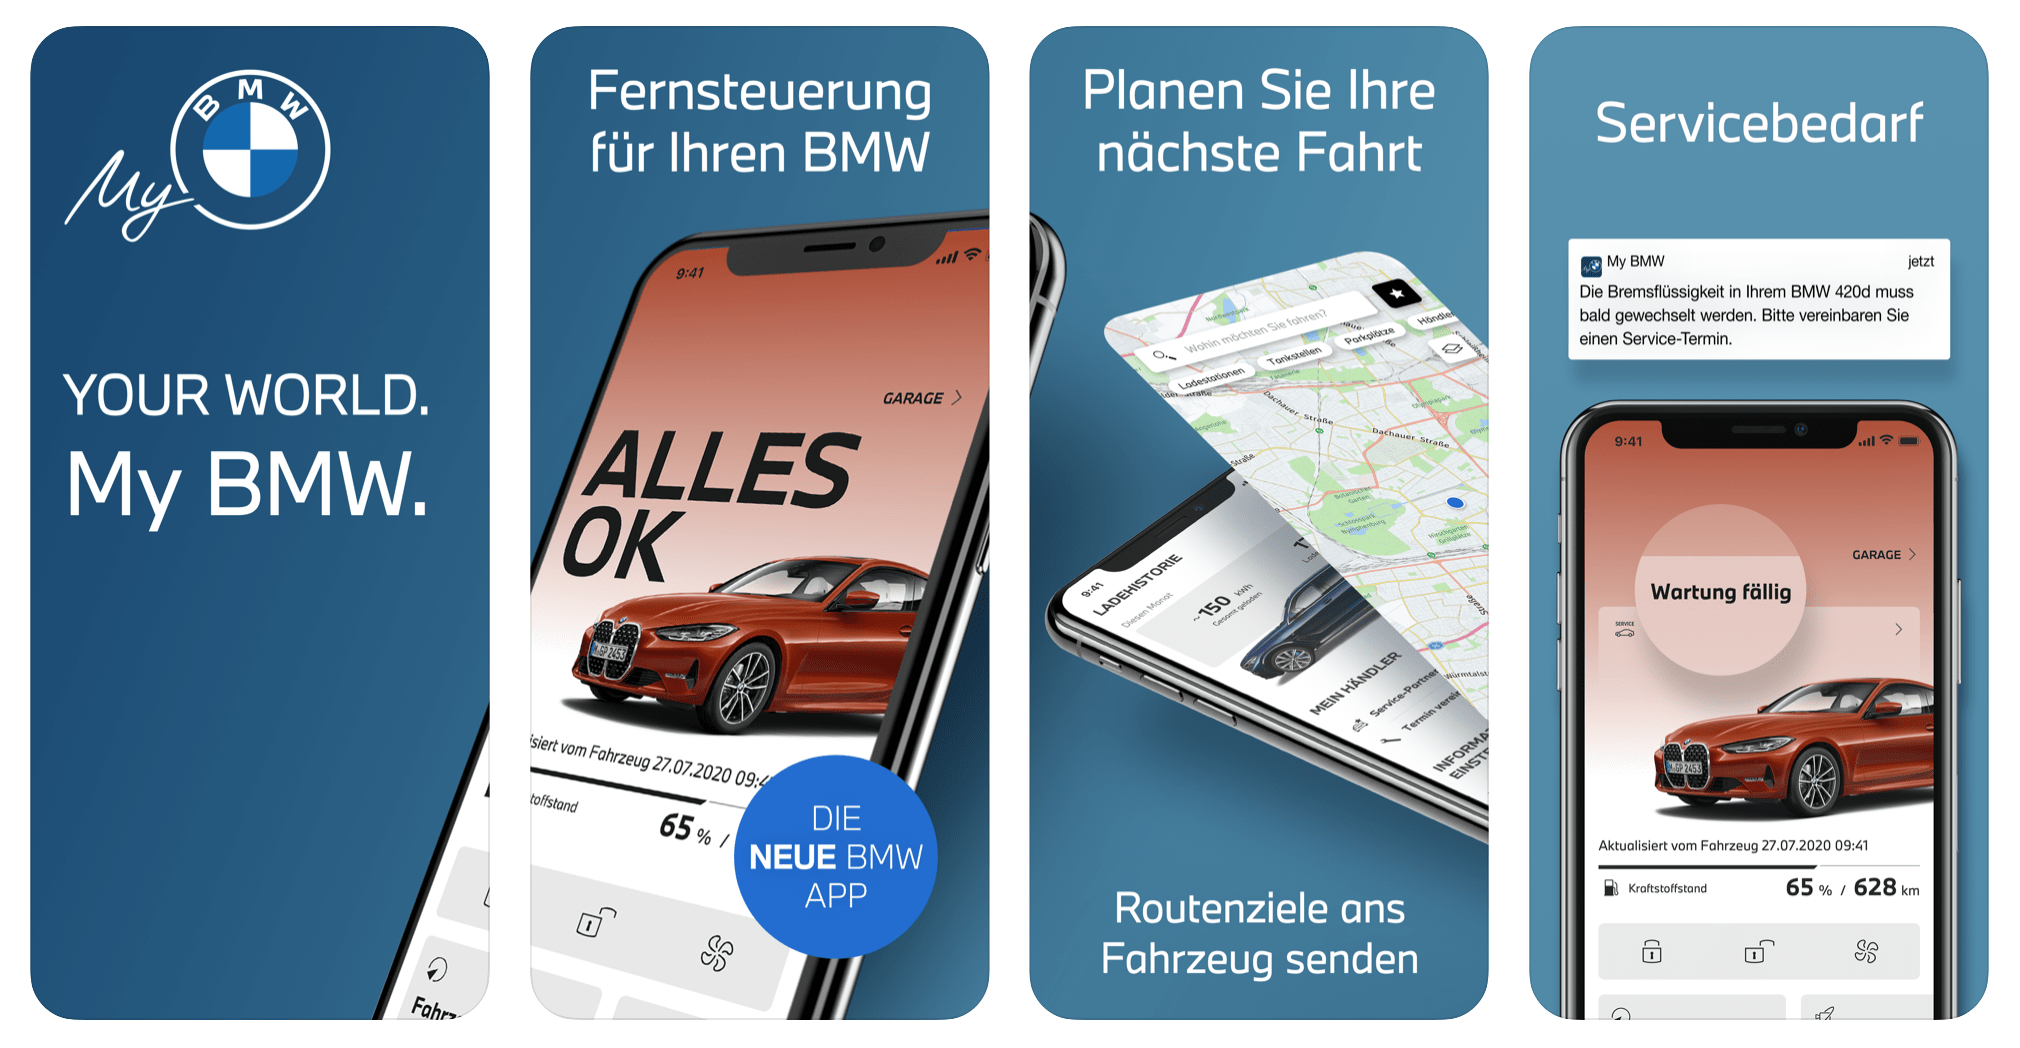 My BMW App replaces old Connect version for BMW vehicles -mac&egg-